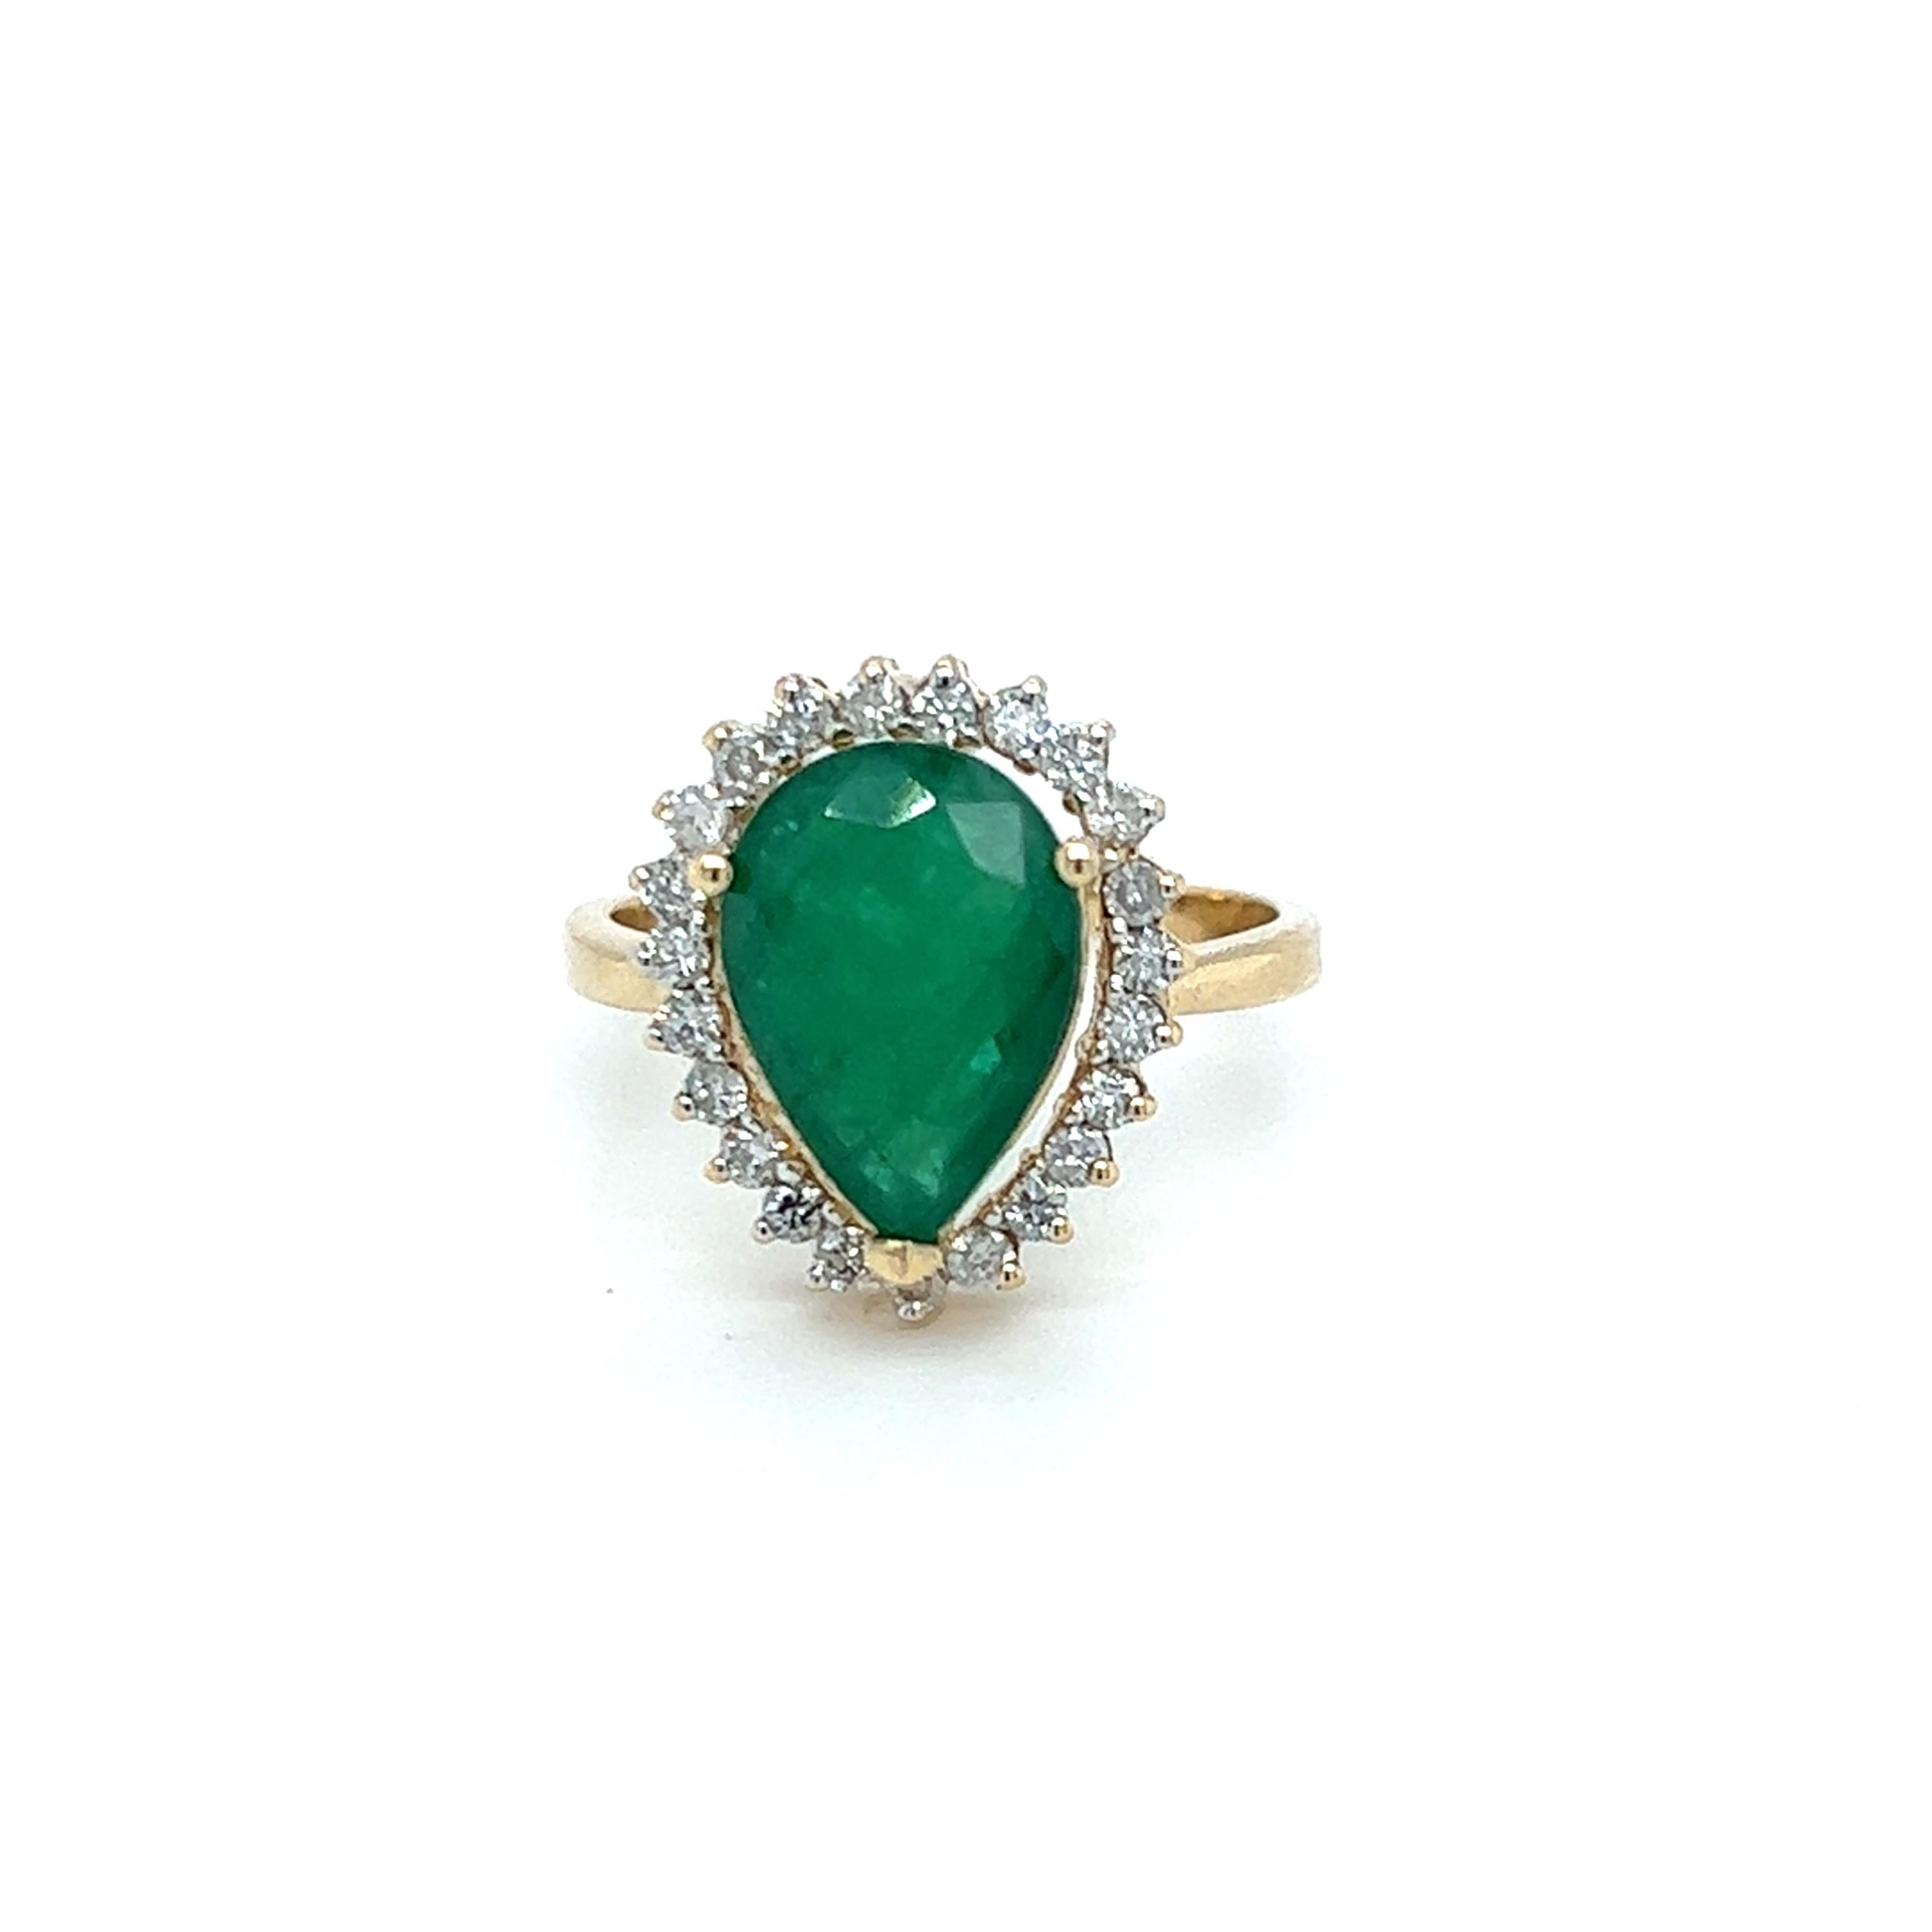 One 14 karat yellow gold ring set with one 13x8.5mm pear-shaped natural emerald, surrounded by a halo of twenty-three (23) round brilliant cut diamonds, approximately 0.33-carat
 total weight with matching H/I color and SI1 clarity. The ring is a